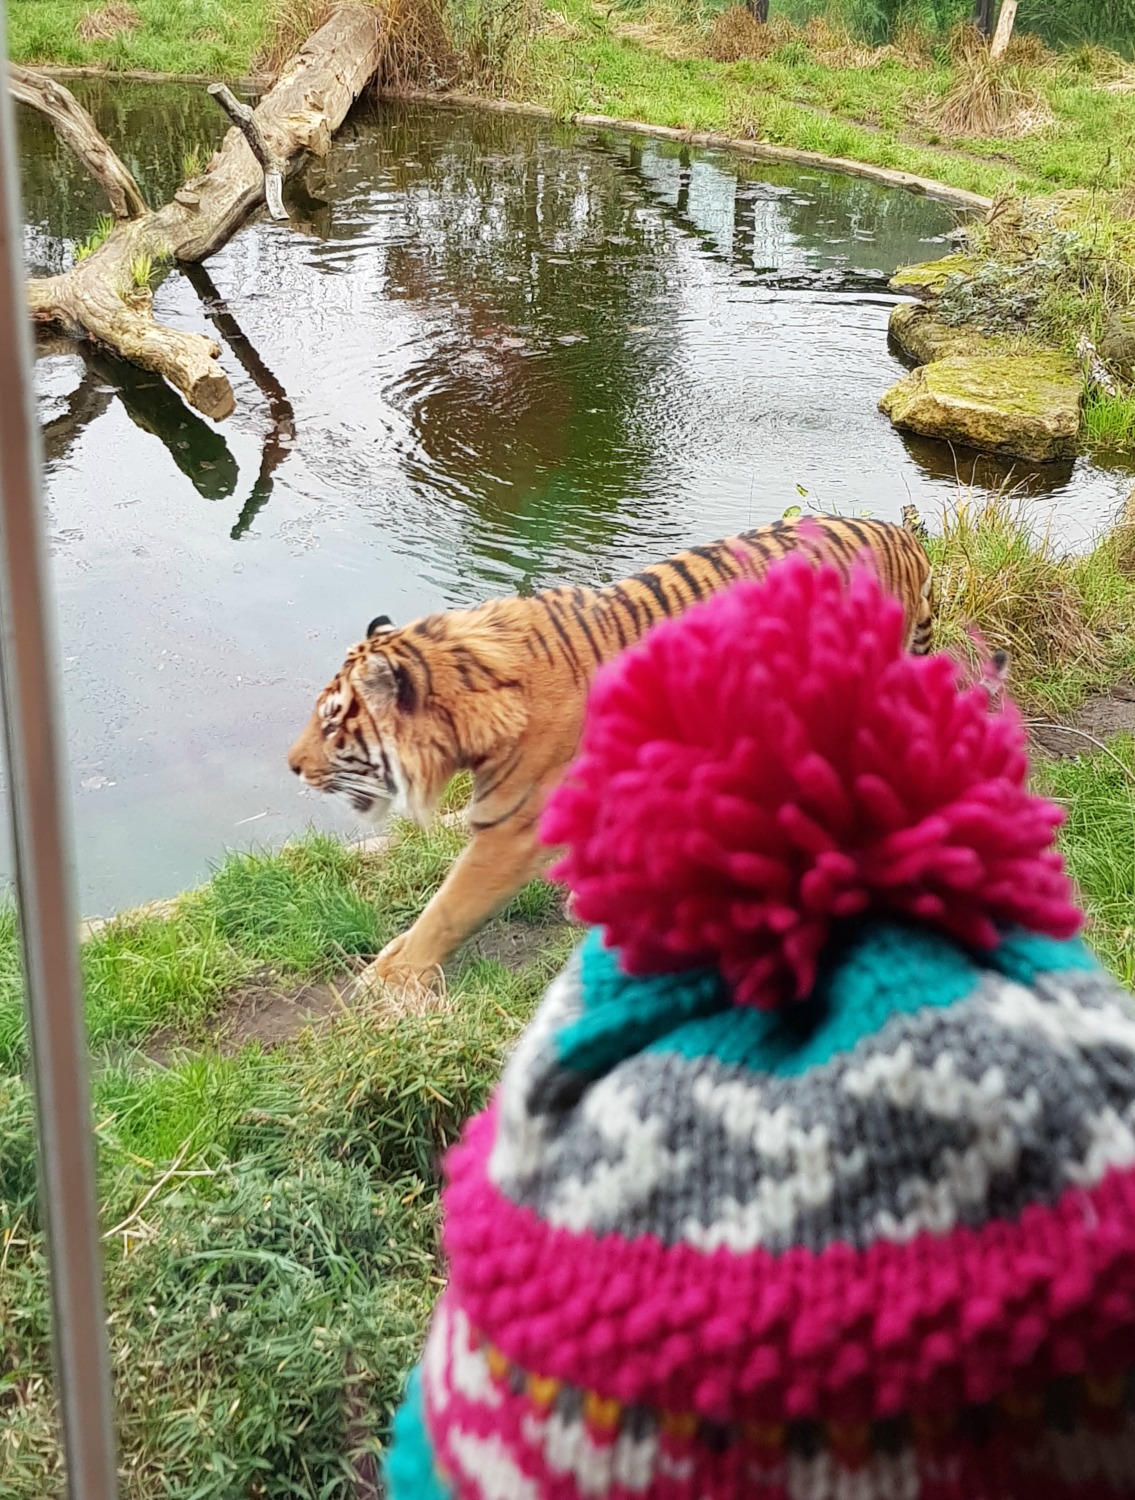 My daughter in woolly bobble hat watches a tiger prowling by its pool - my tips for visiting London Zoo with kids